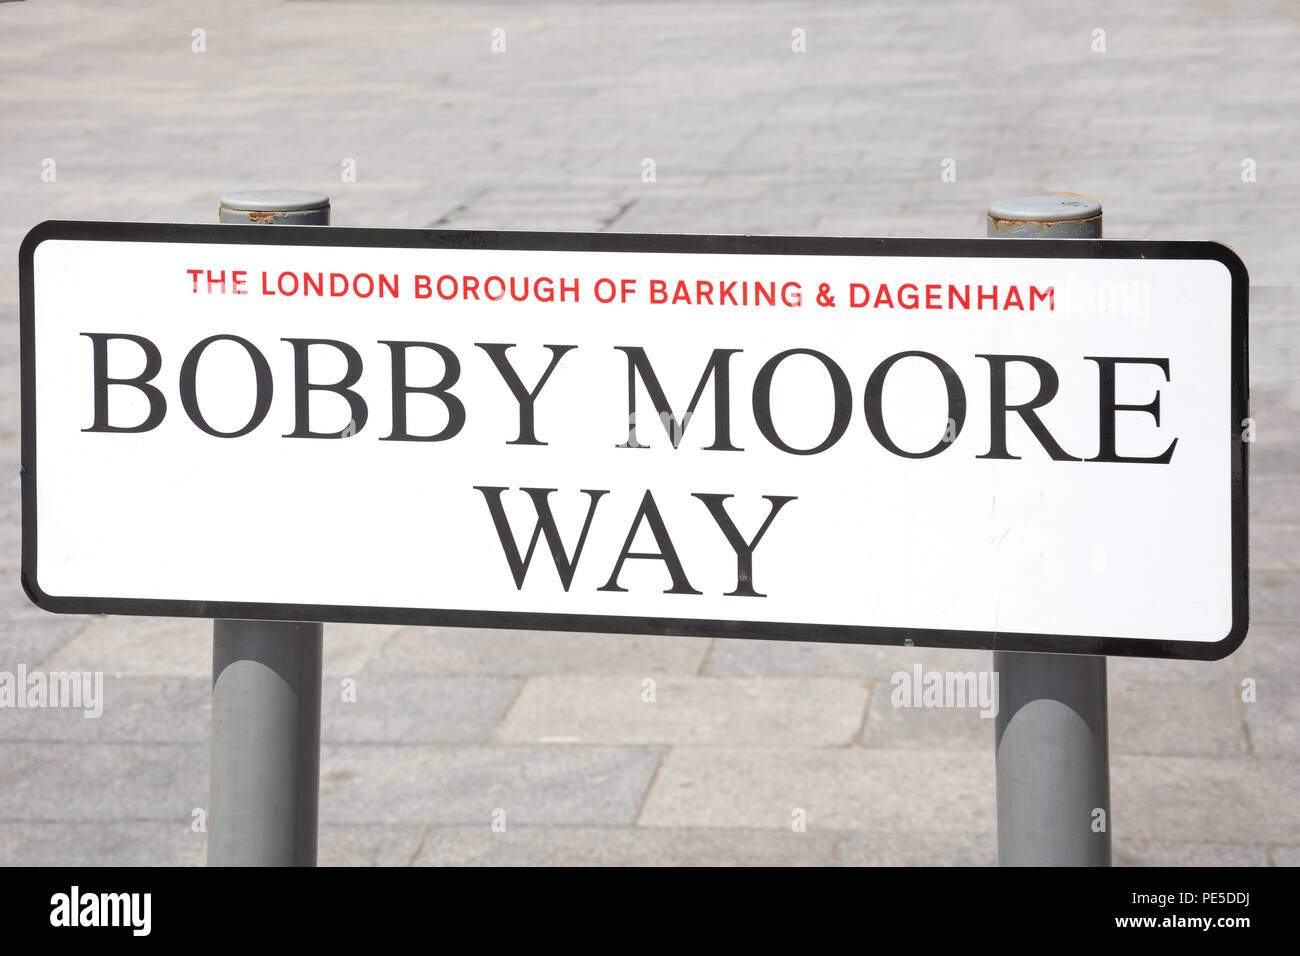 Bobby Moore Way road sign, aboiements, aboiements, London Borough of Barking and Dagenham, Greater London, Angleterre, Royaume-Uni Banque D'Images